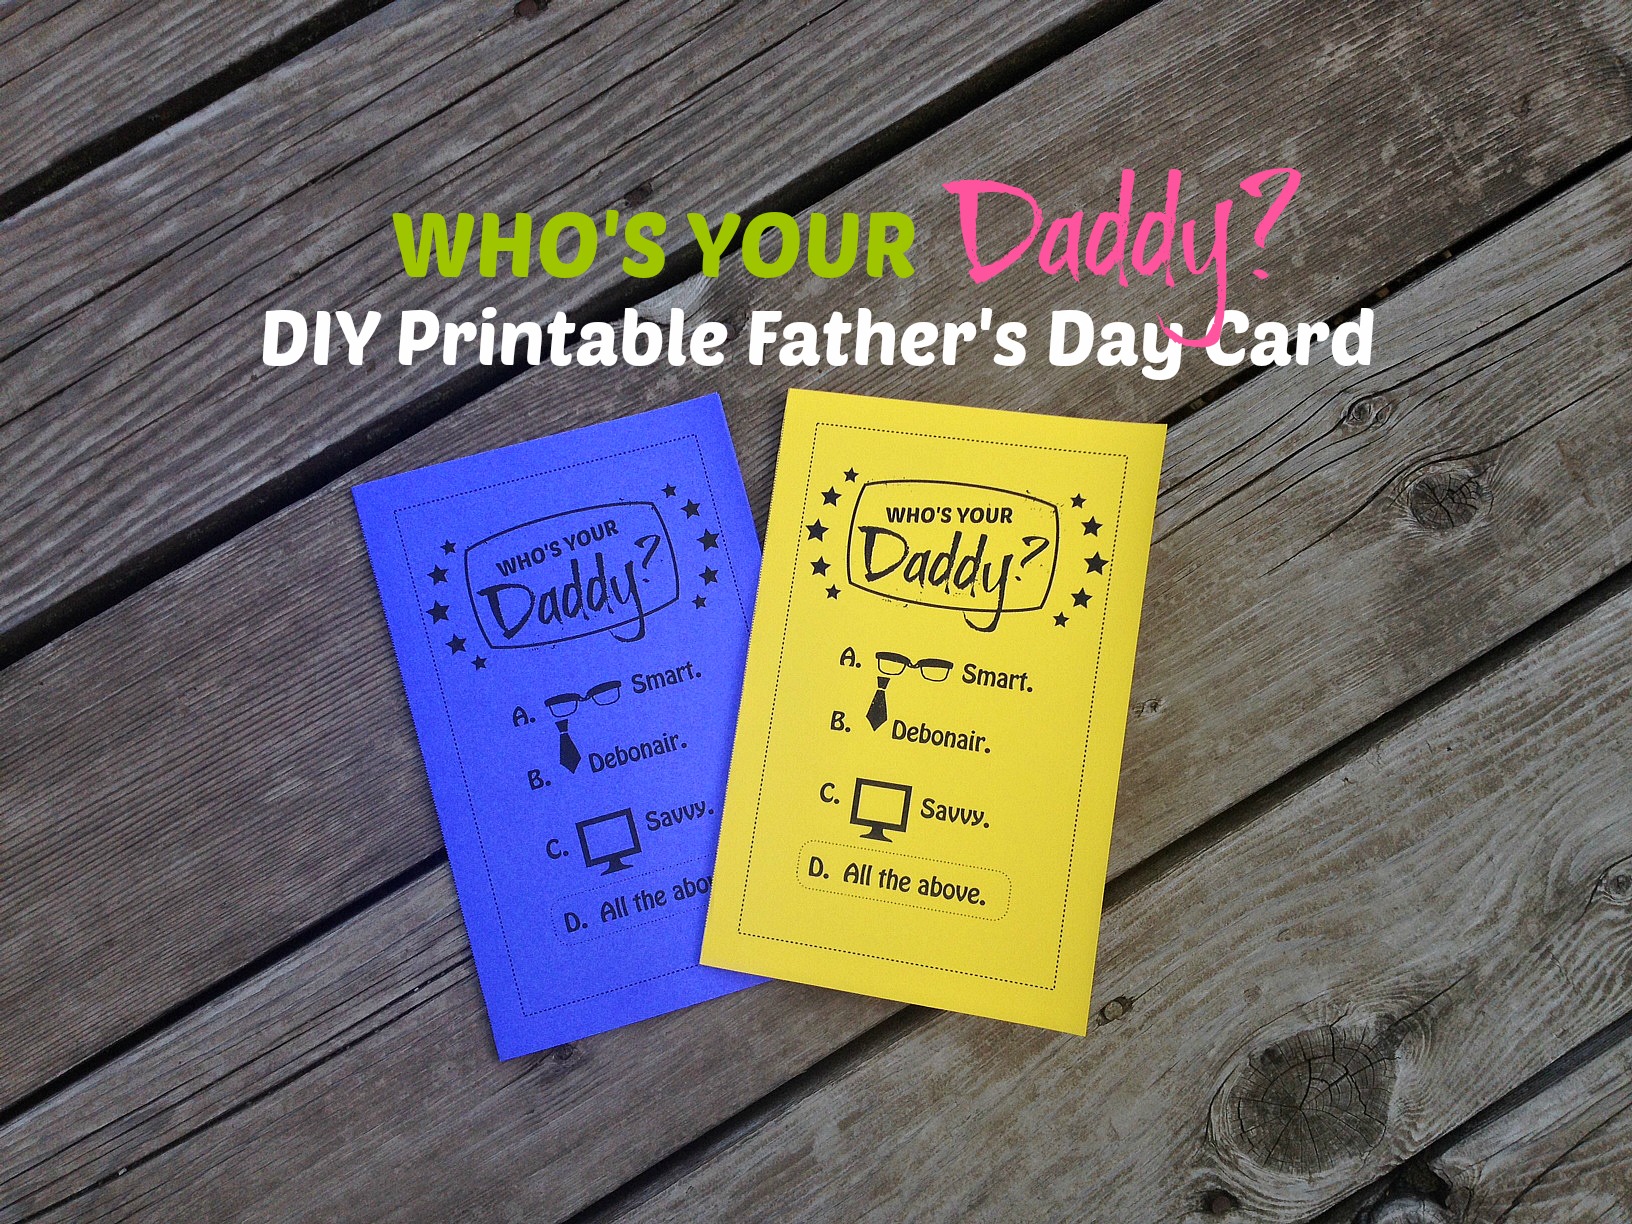 diy-printable-father-s-day-card-who-s-your-daddy